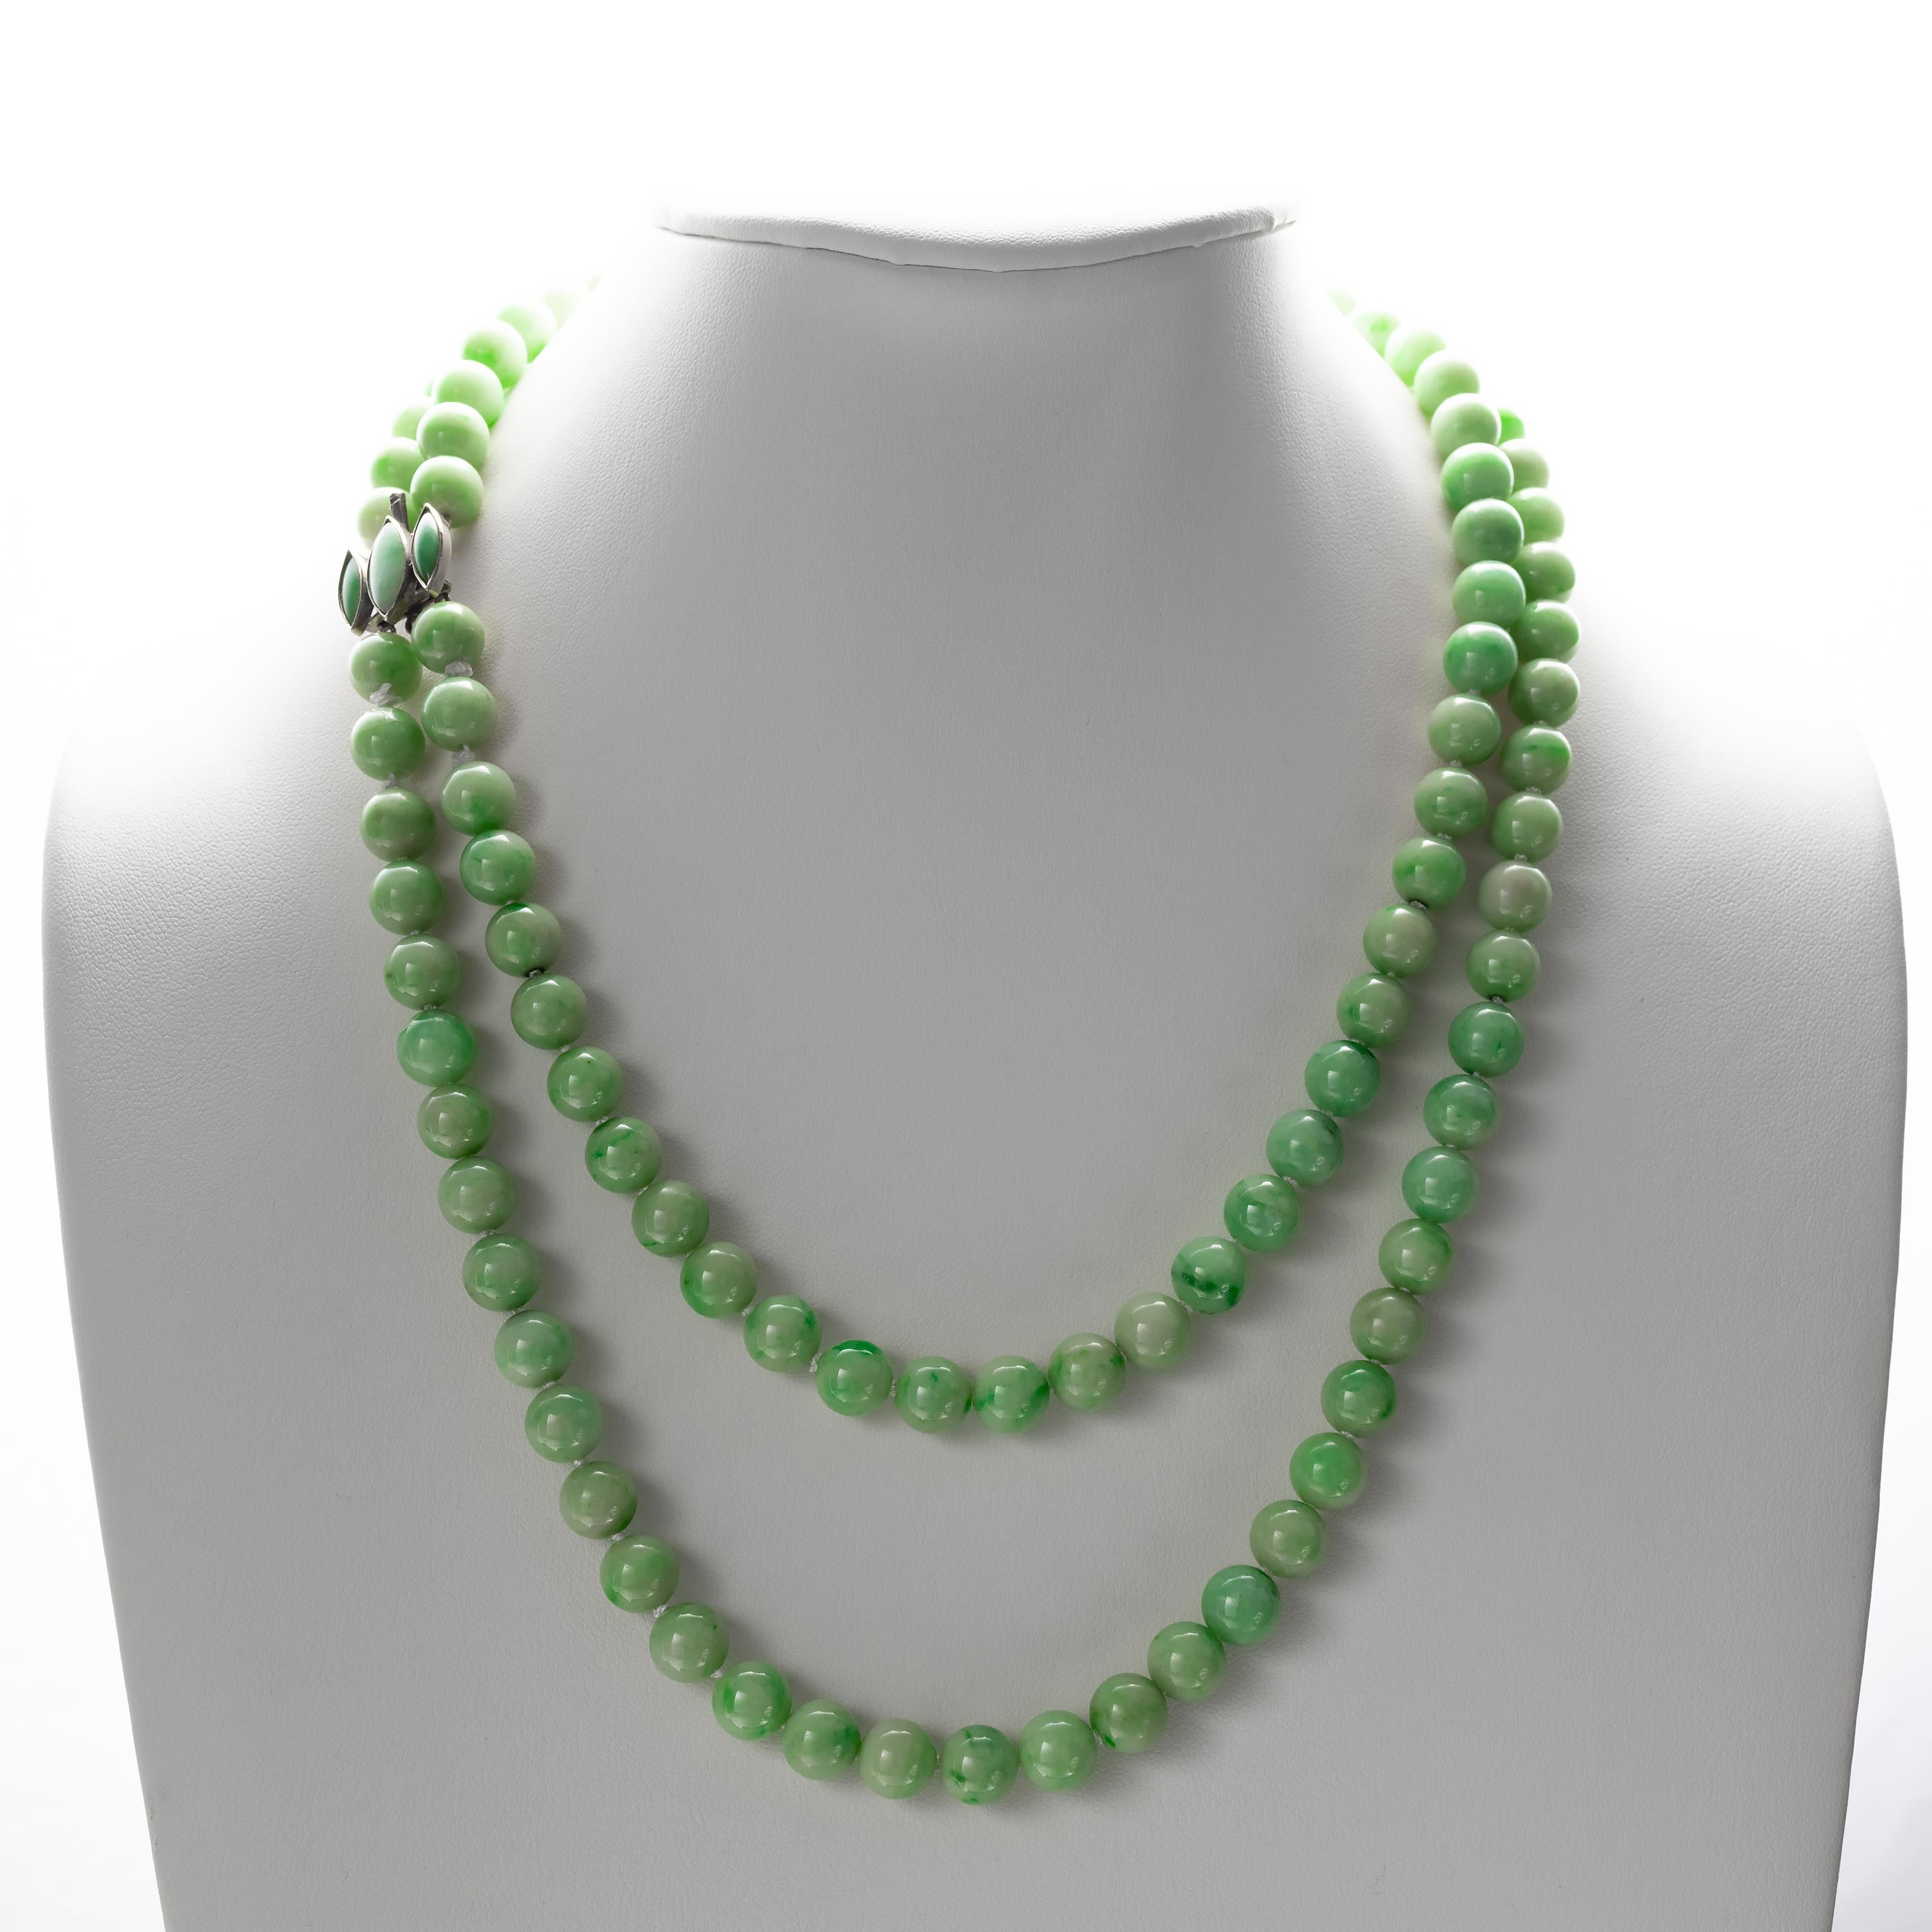 Grand, beautiful, and rare, this doubler-strand jade necklace features 114 hand-carved and polished untreated Burmese jadeite beads. The fresh and light apple green jadeite beads are nearly uniform in size, measuring approximately 9.5mm. These are